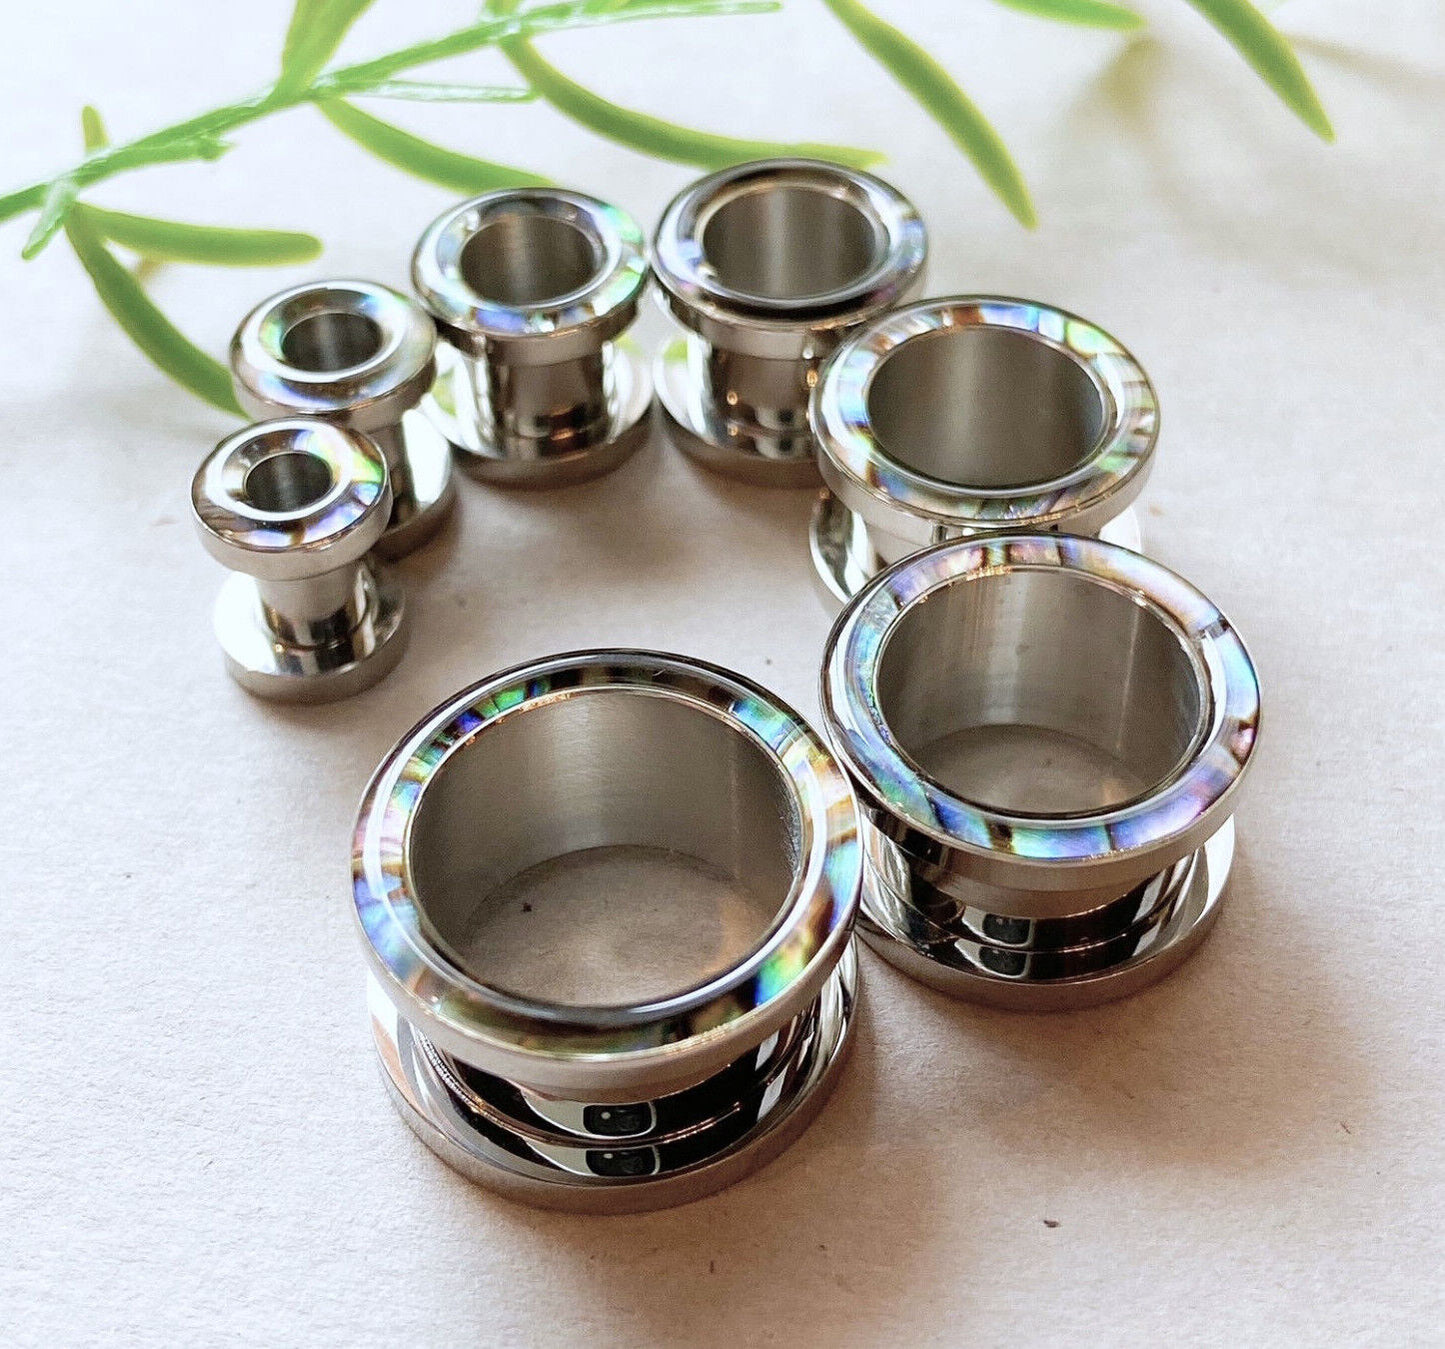 PAIR of Beautiful Abalone Inlay Steel Screw Fit Tunnels - Gauges 4g (5mm) thru 5/8" (16mm) available!